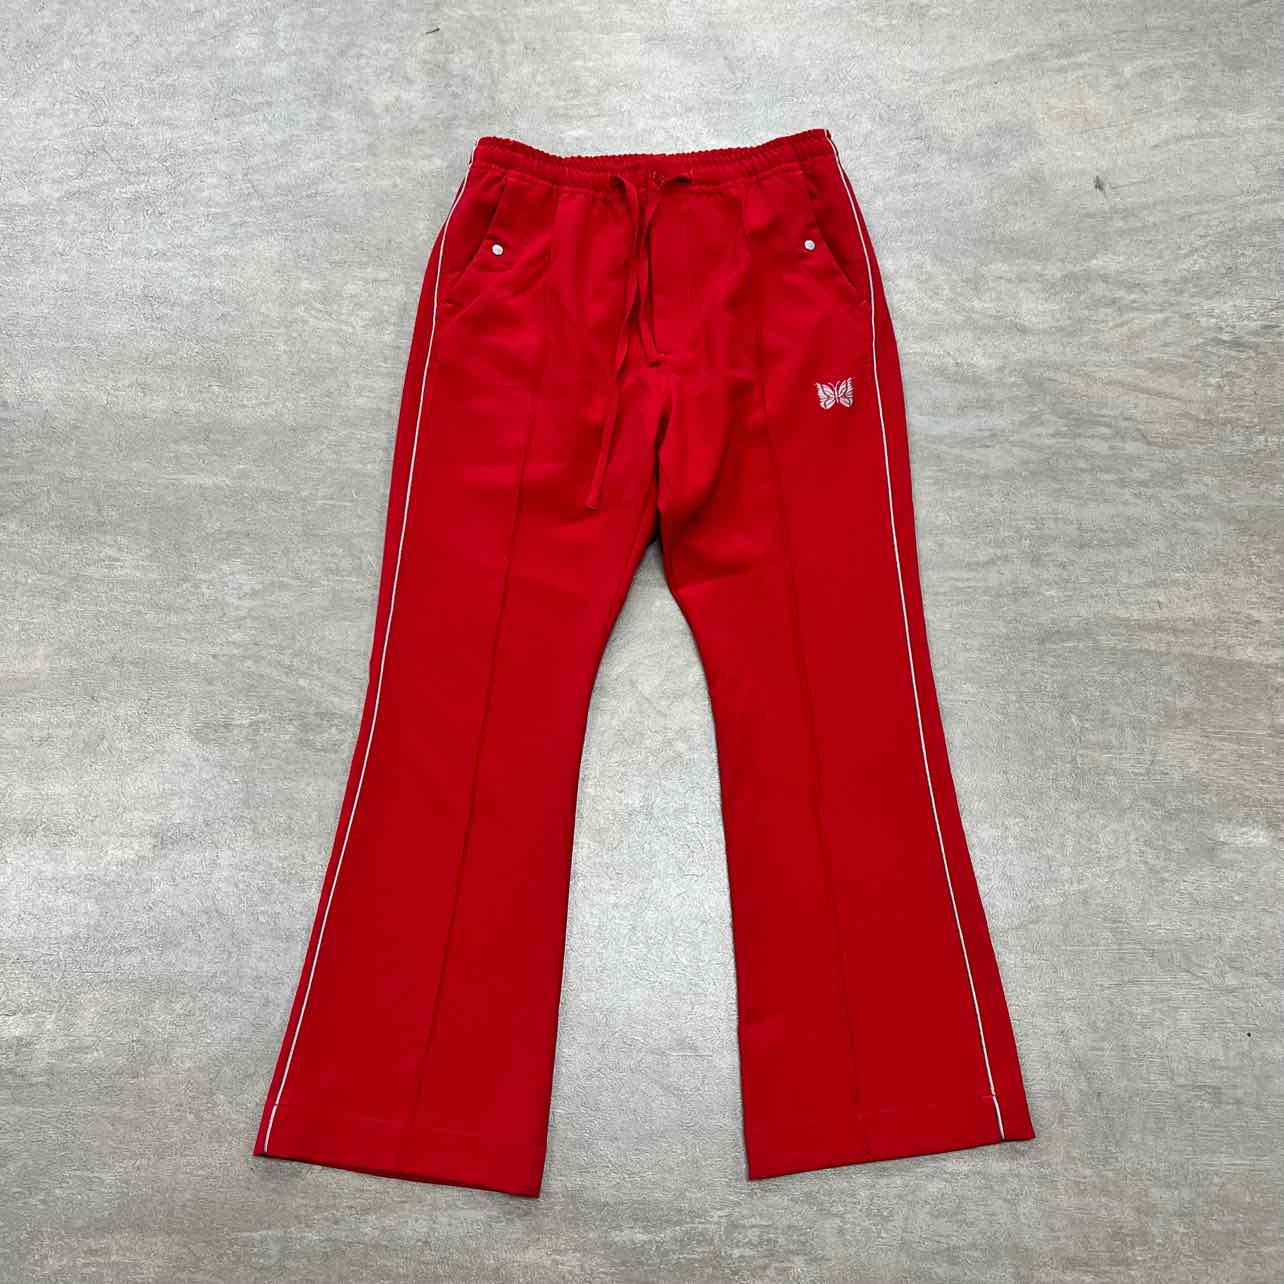 Needles Pant "COWBOY" Red Used Size M